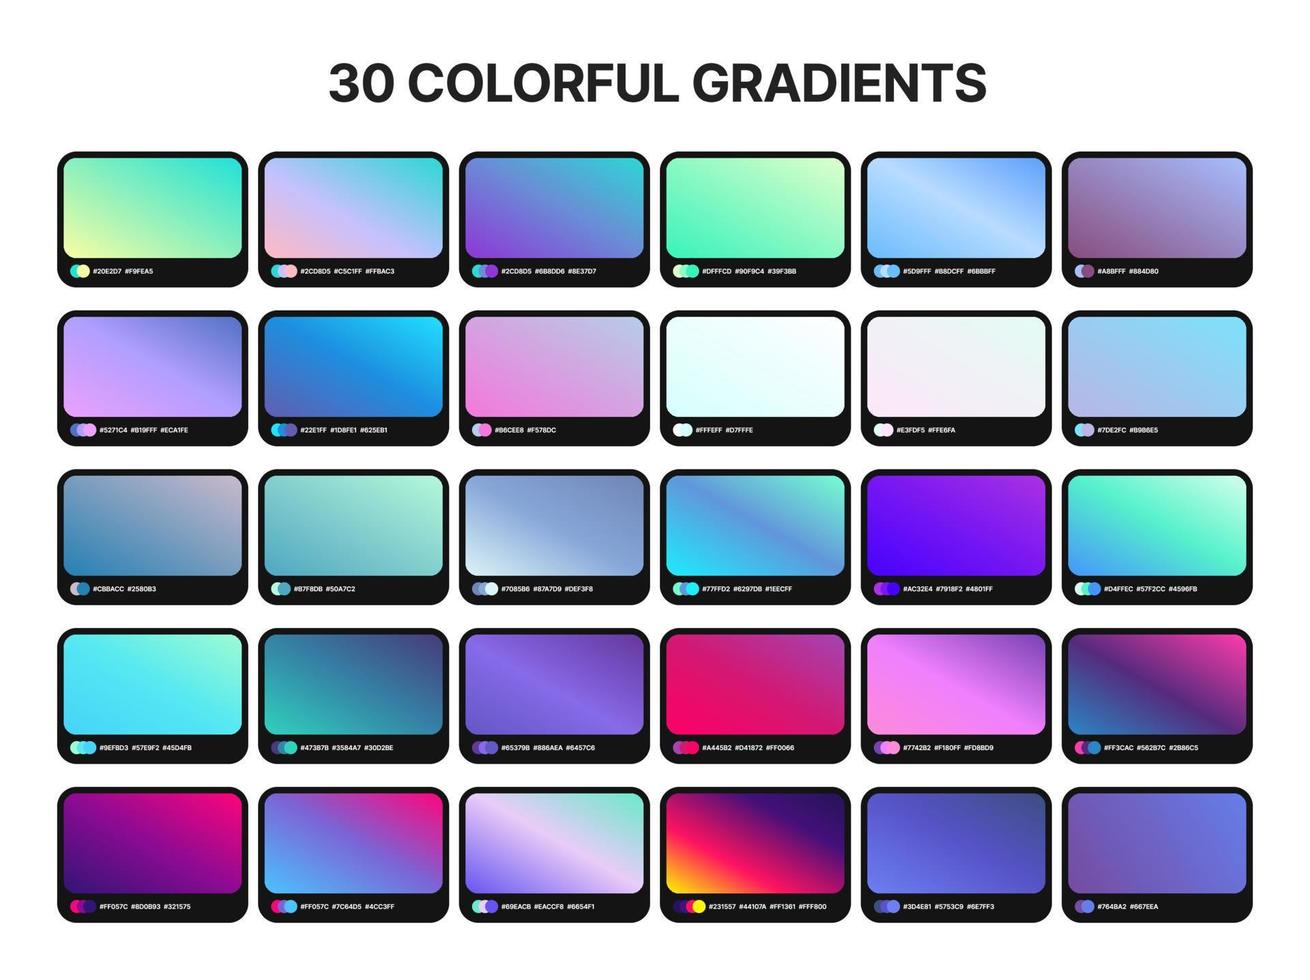 30 best gradient backgrounds. Gradient backgrounds with color codes. Vector abstract background.